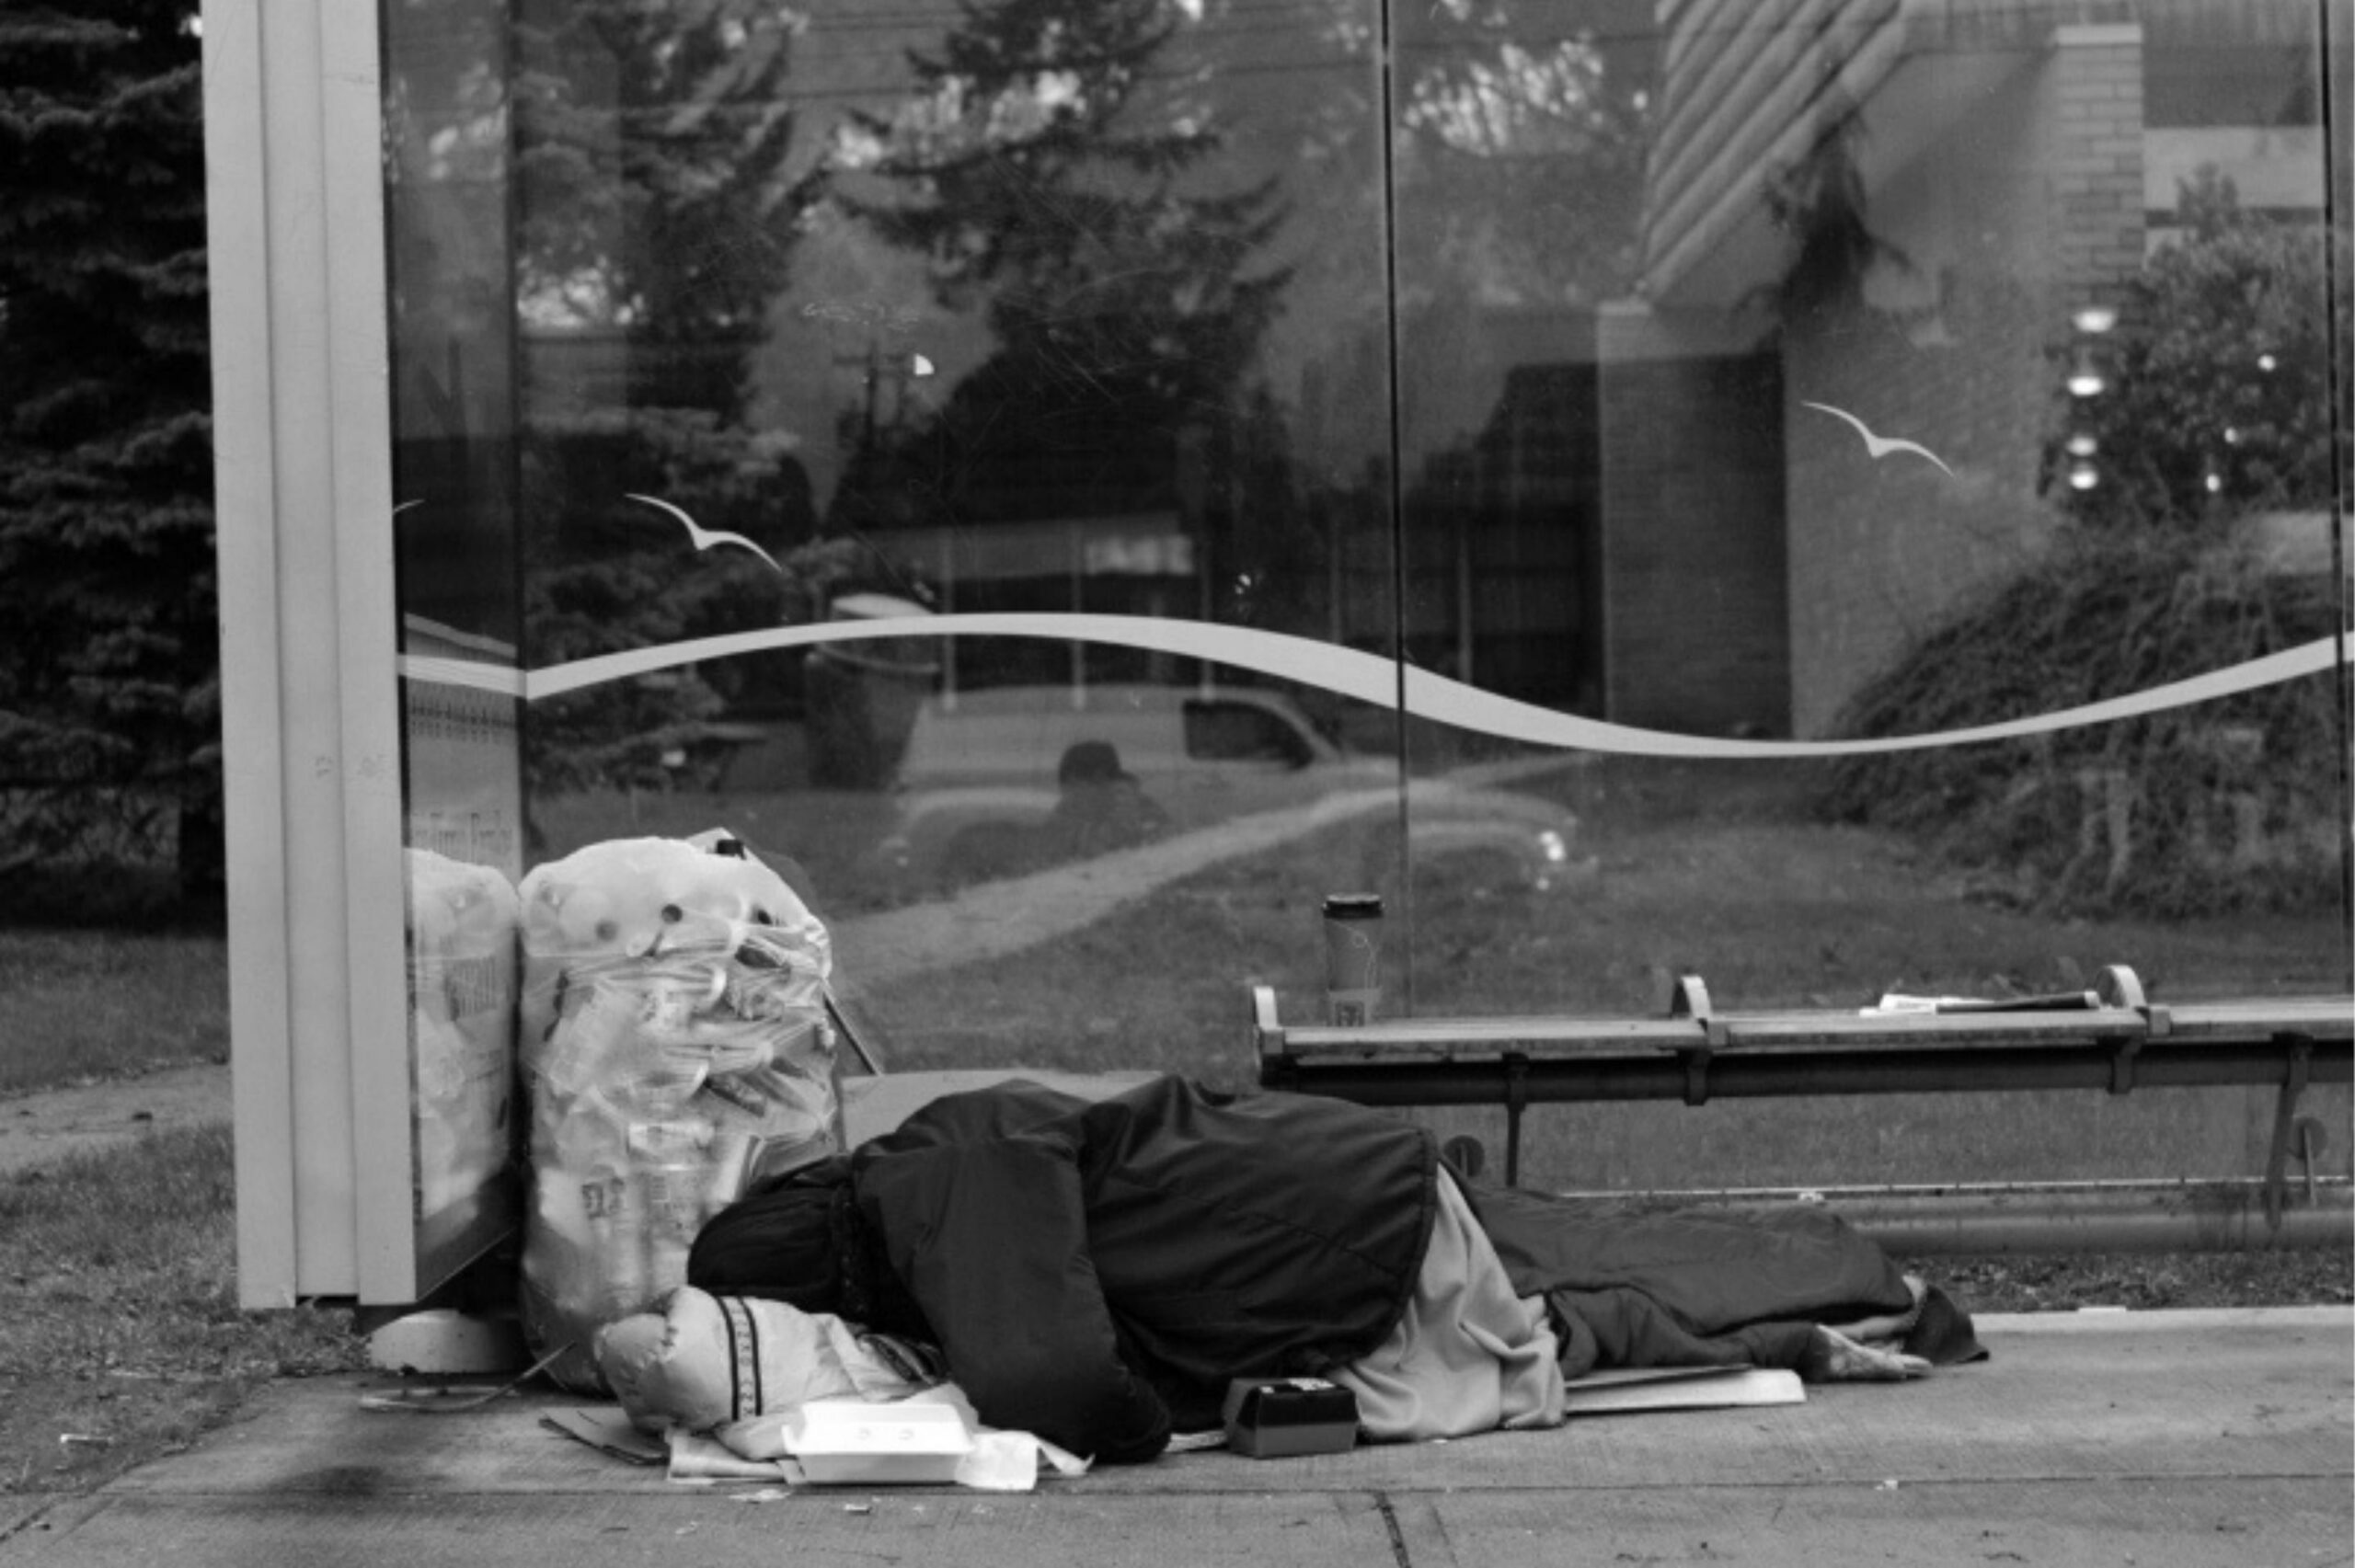 Sleeping on the street in Vancouver